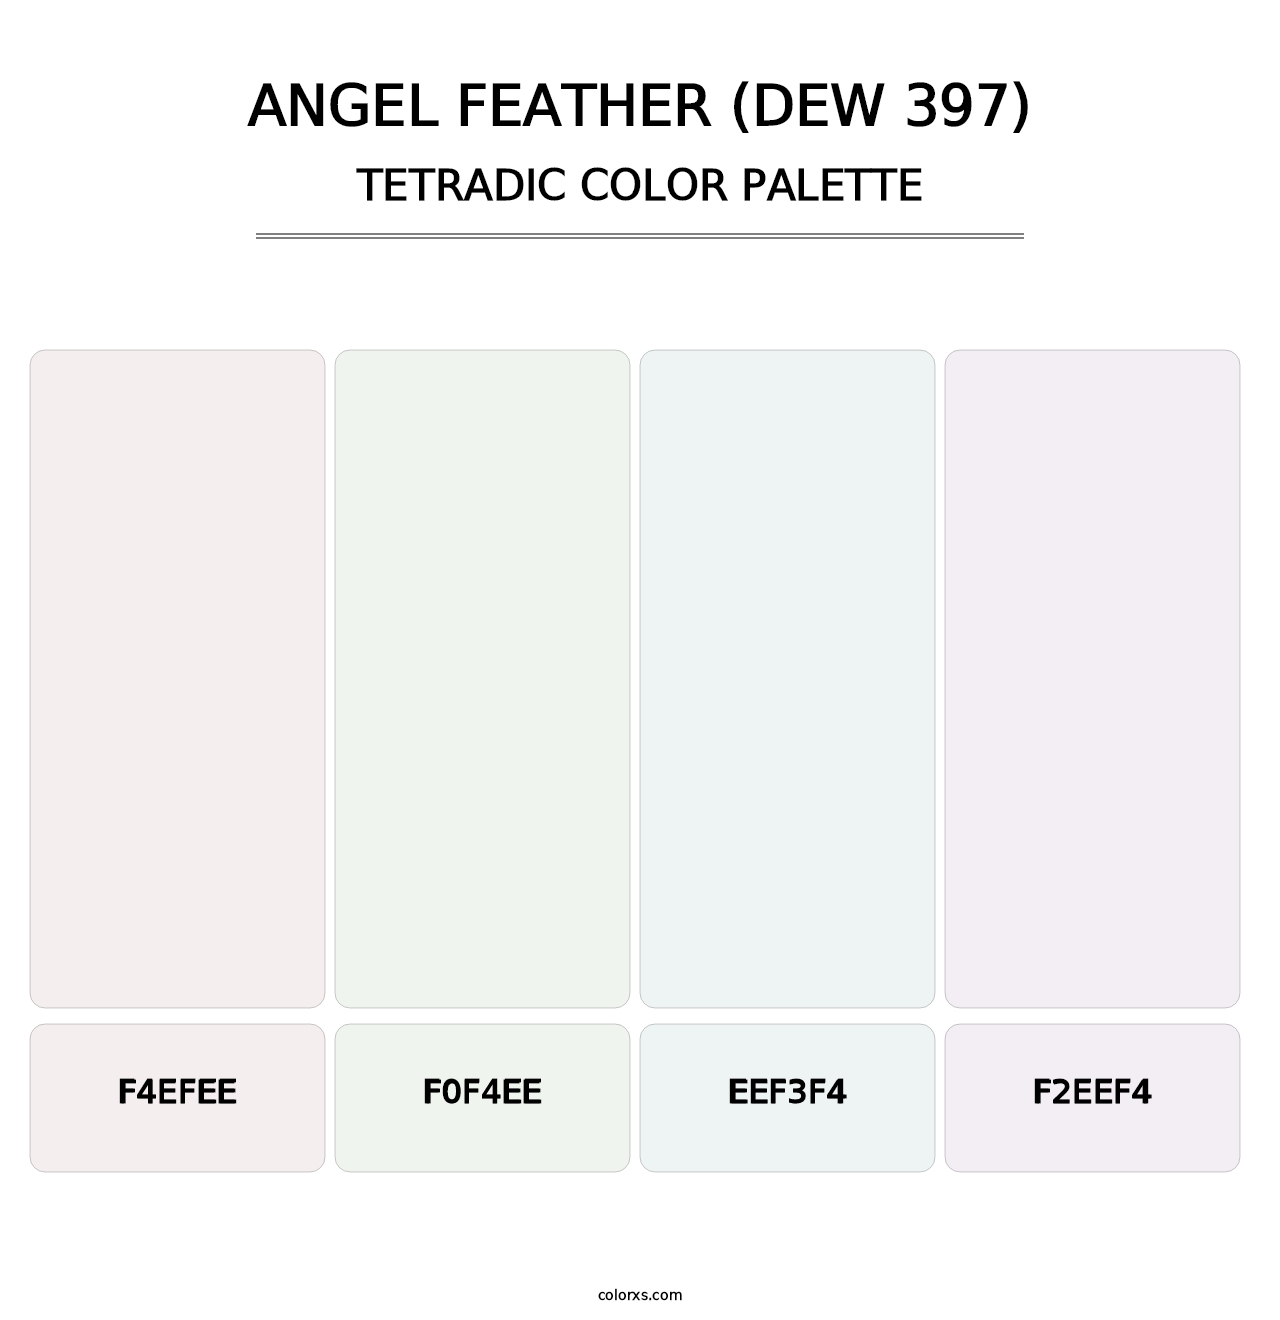 Angel Feather (DEW 397) - Tetradic Color Palette